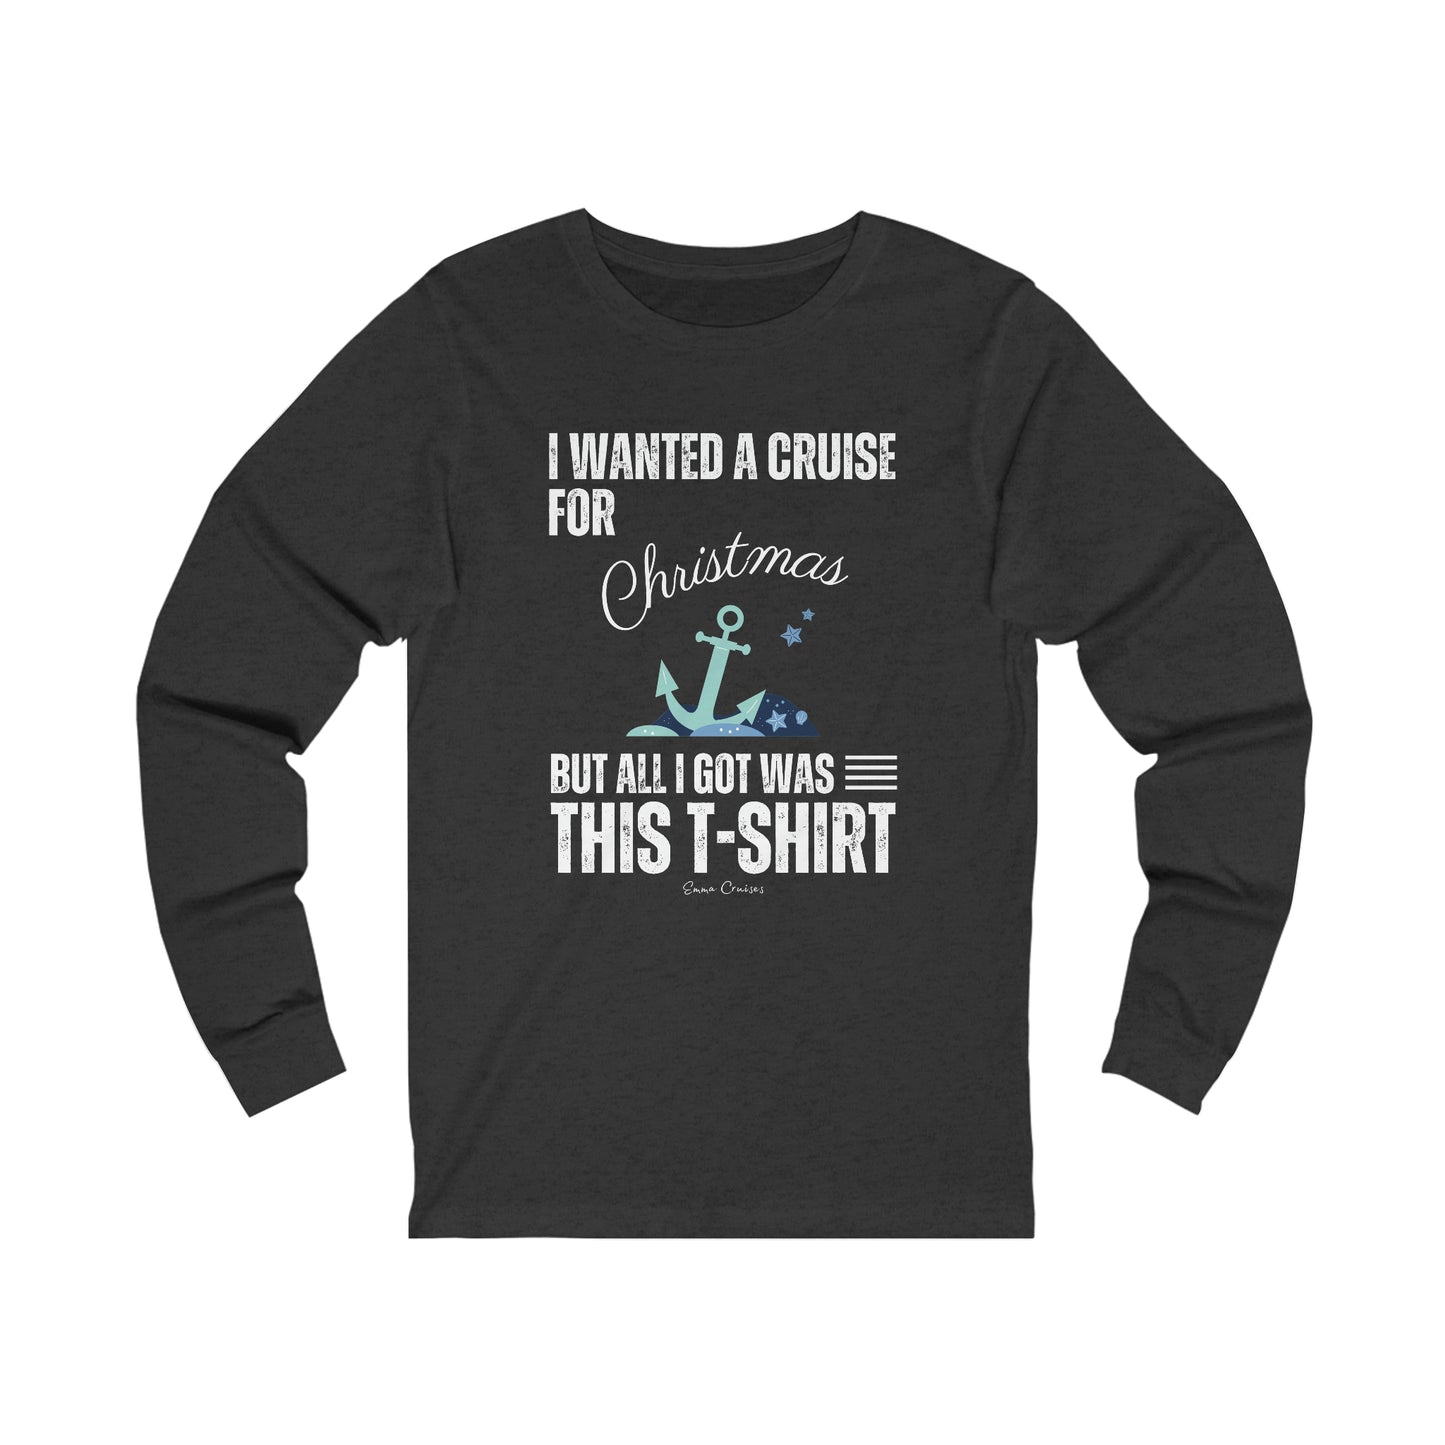 I Wanted a Cruise for Christmas - UNISEX T-Shirt